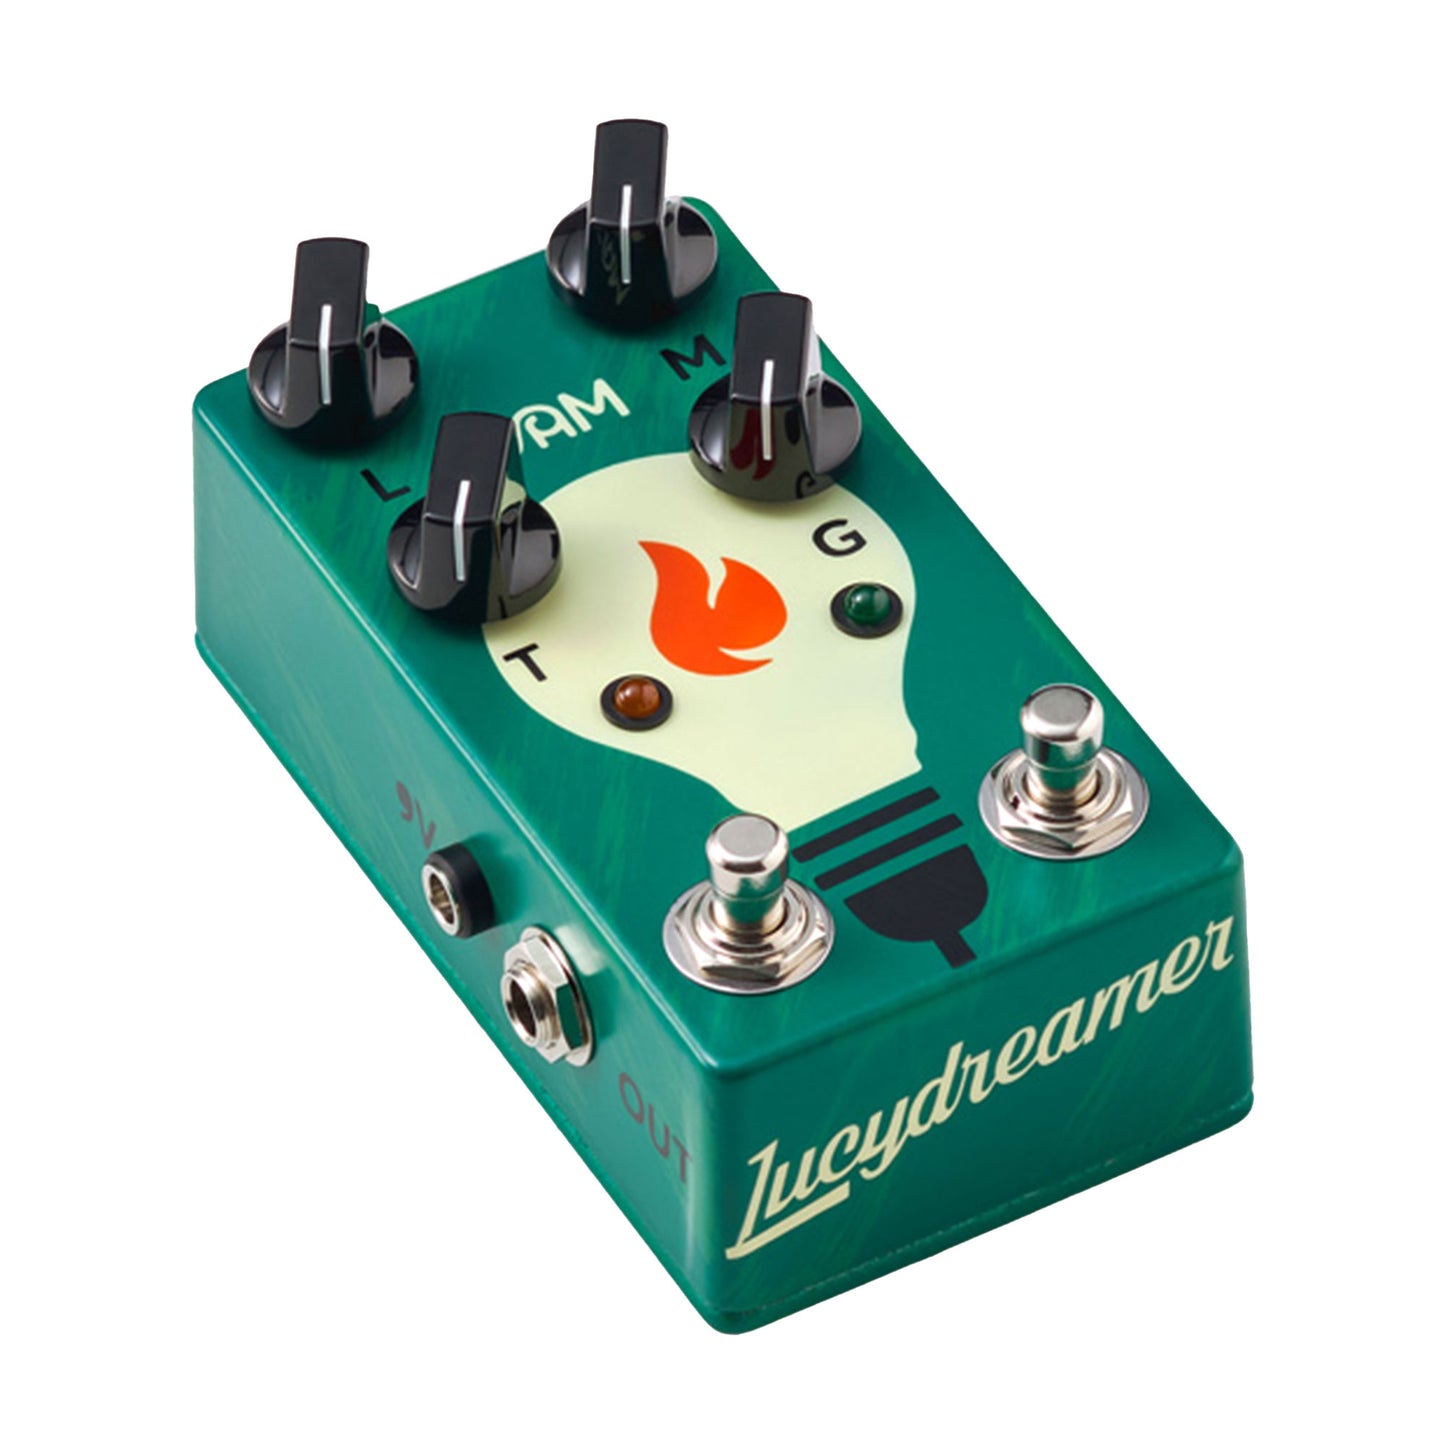 JAM Pedals Lucydreamer Overdrive Pedal